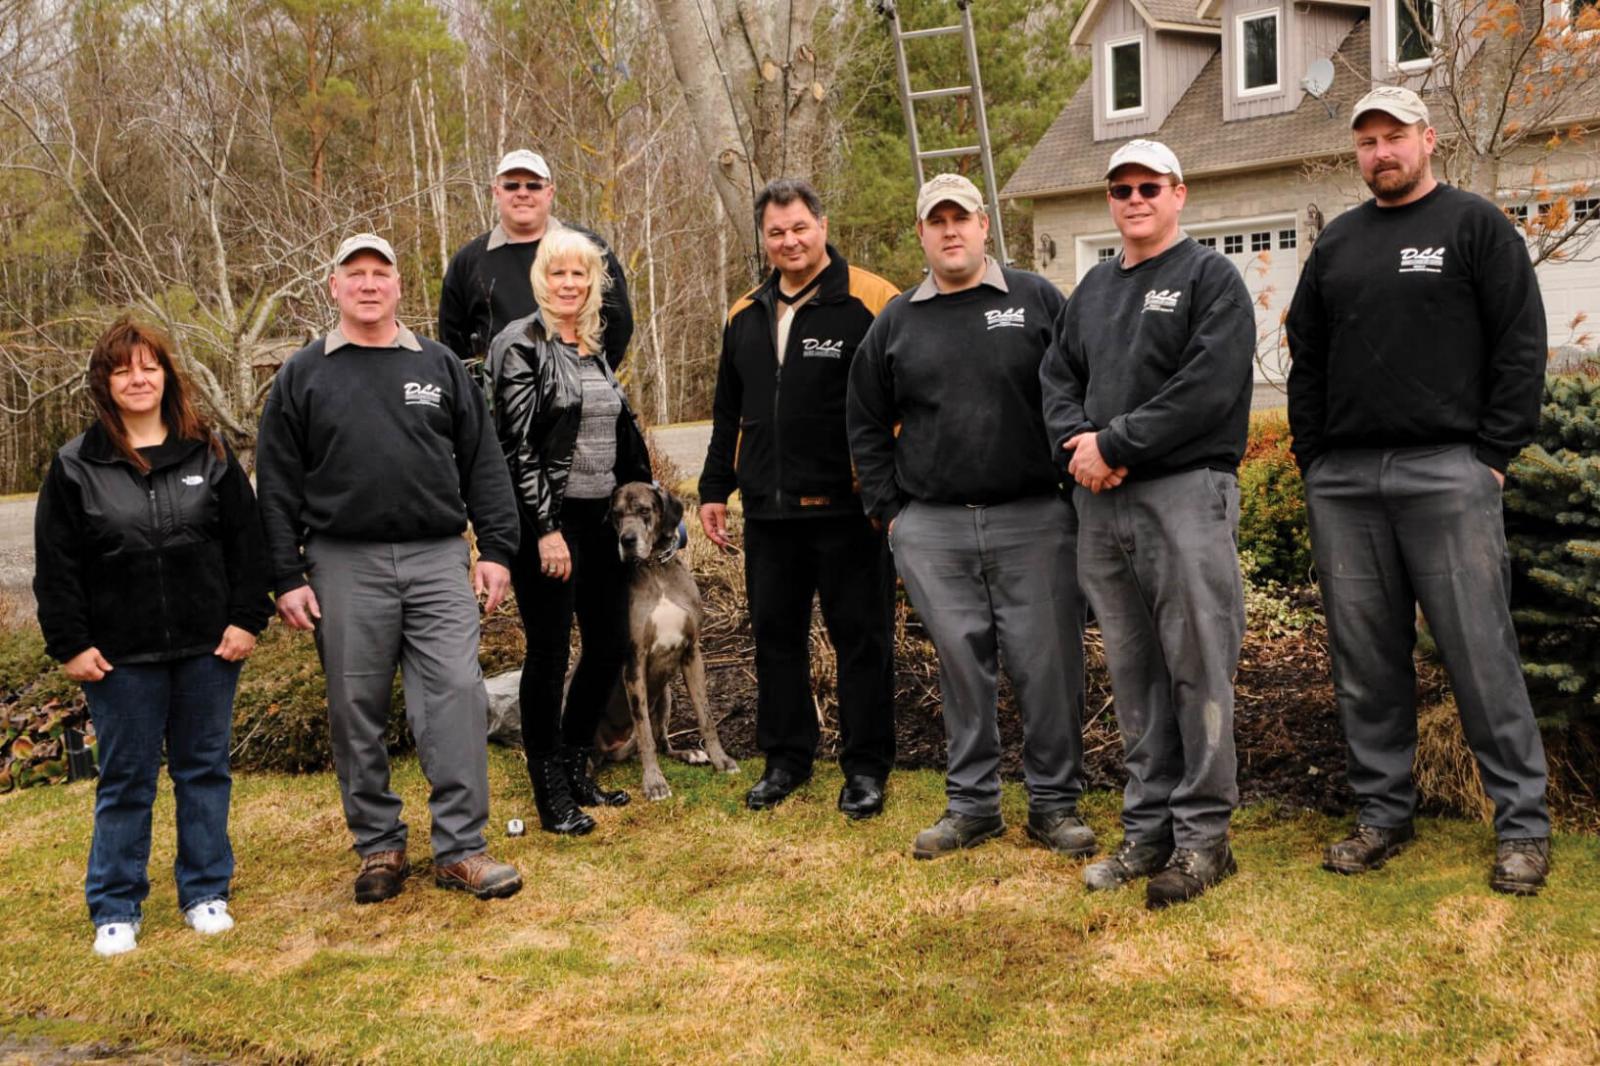 DiMarco Landscape Lighting crew. From left, Laurie Barnes, Joe Willemse, Nick Brazier, Theresa DiMarco, Frank DiMarco, Stew Dunn, Wyatt Lambert and Kevin Mitchell.